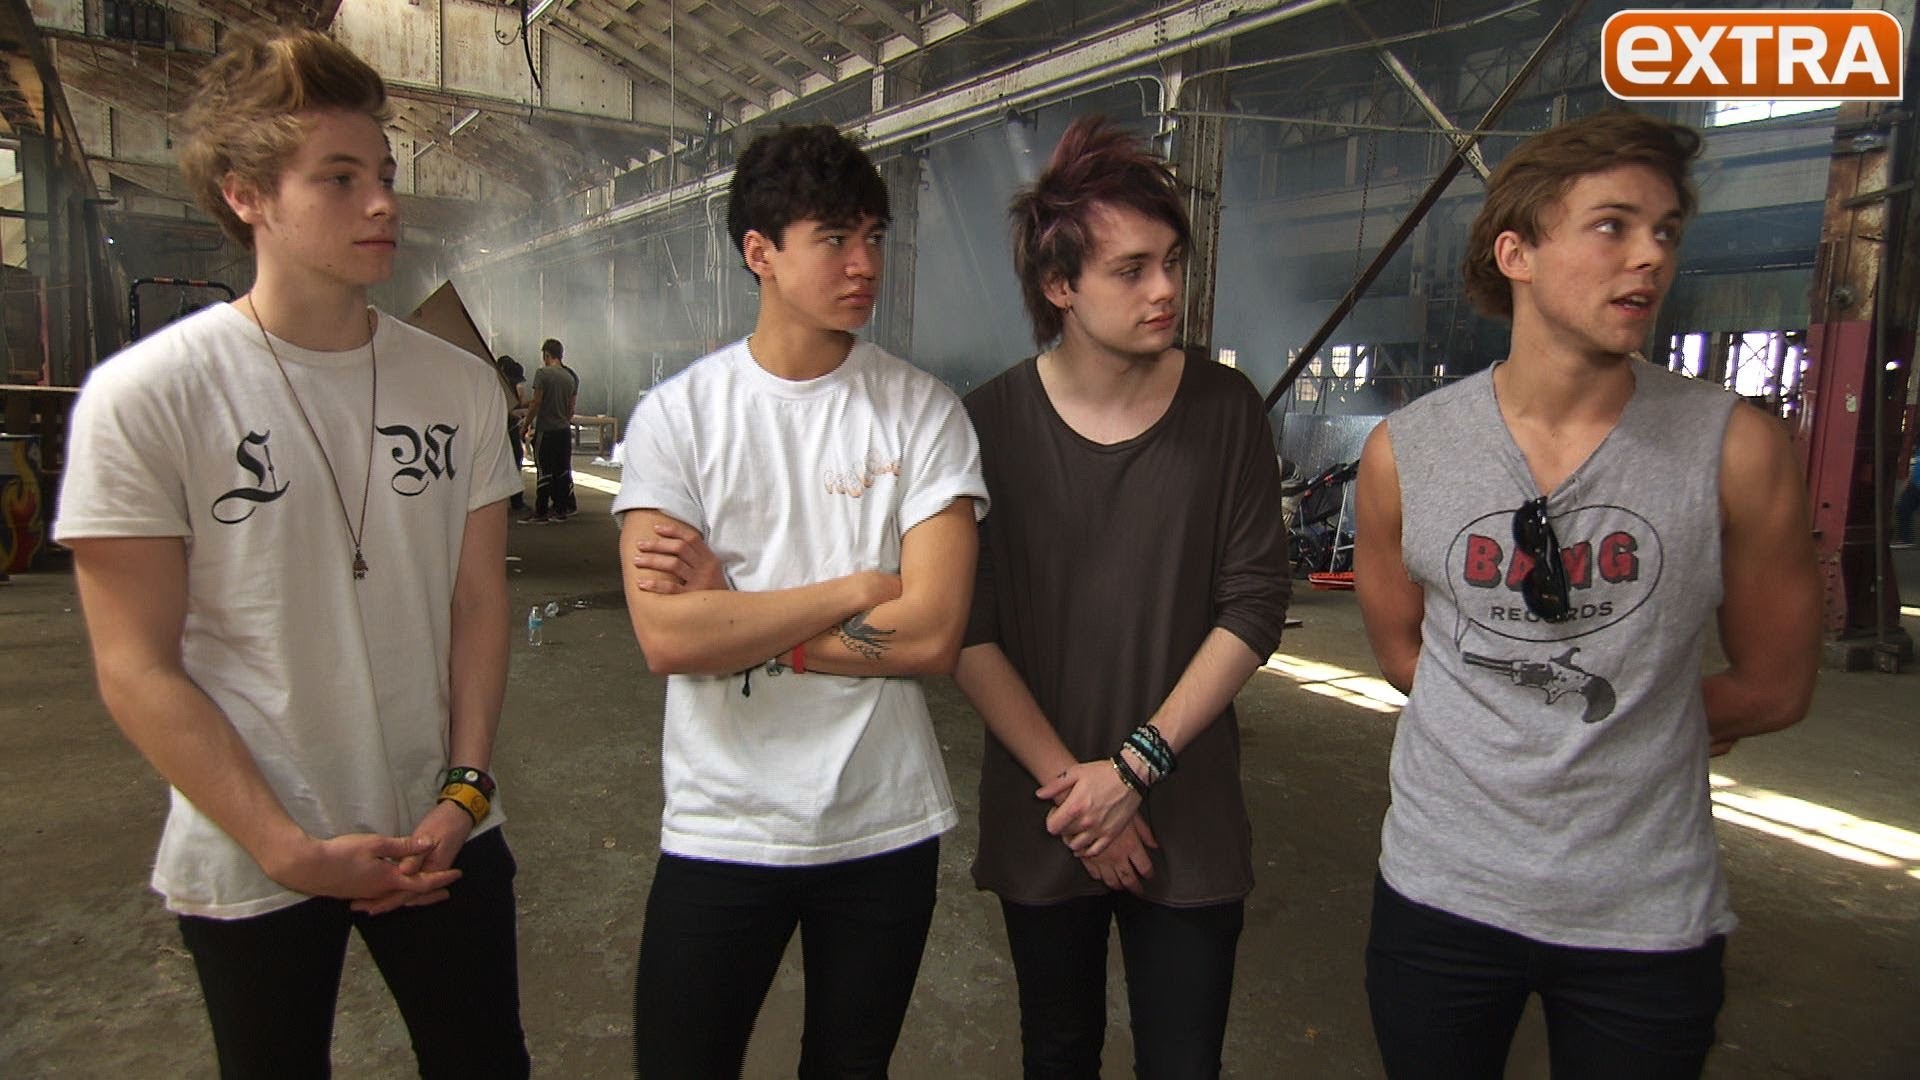 1920x1080 Why 5 Seconds of Summer Is Confused by All the Female Fan Attention -  YouTube